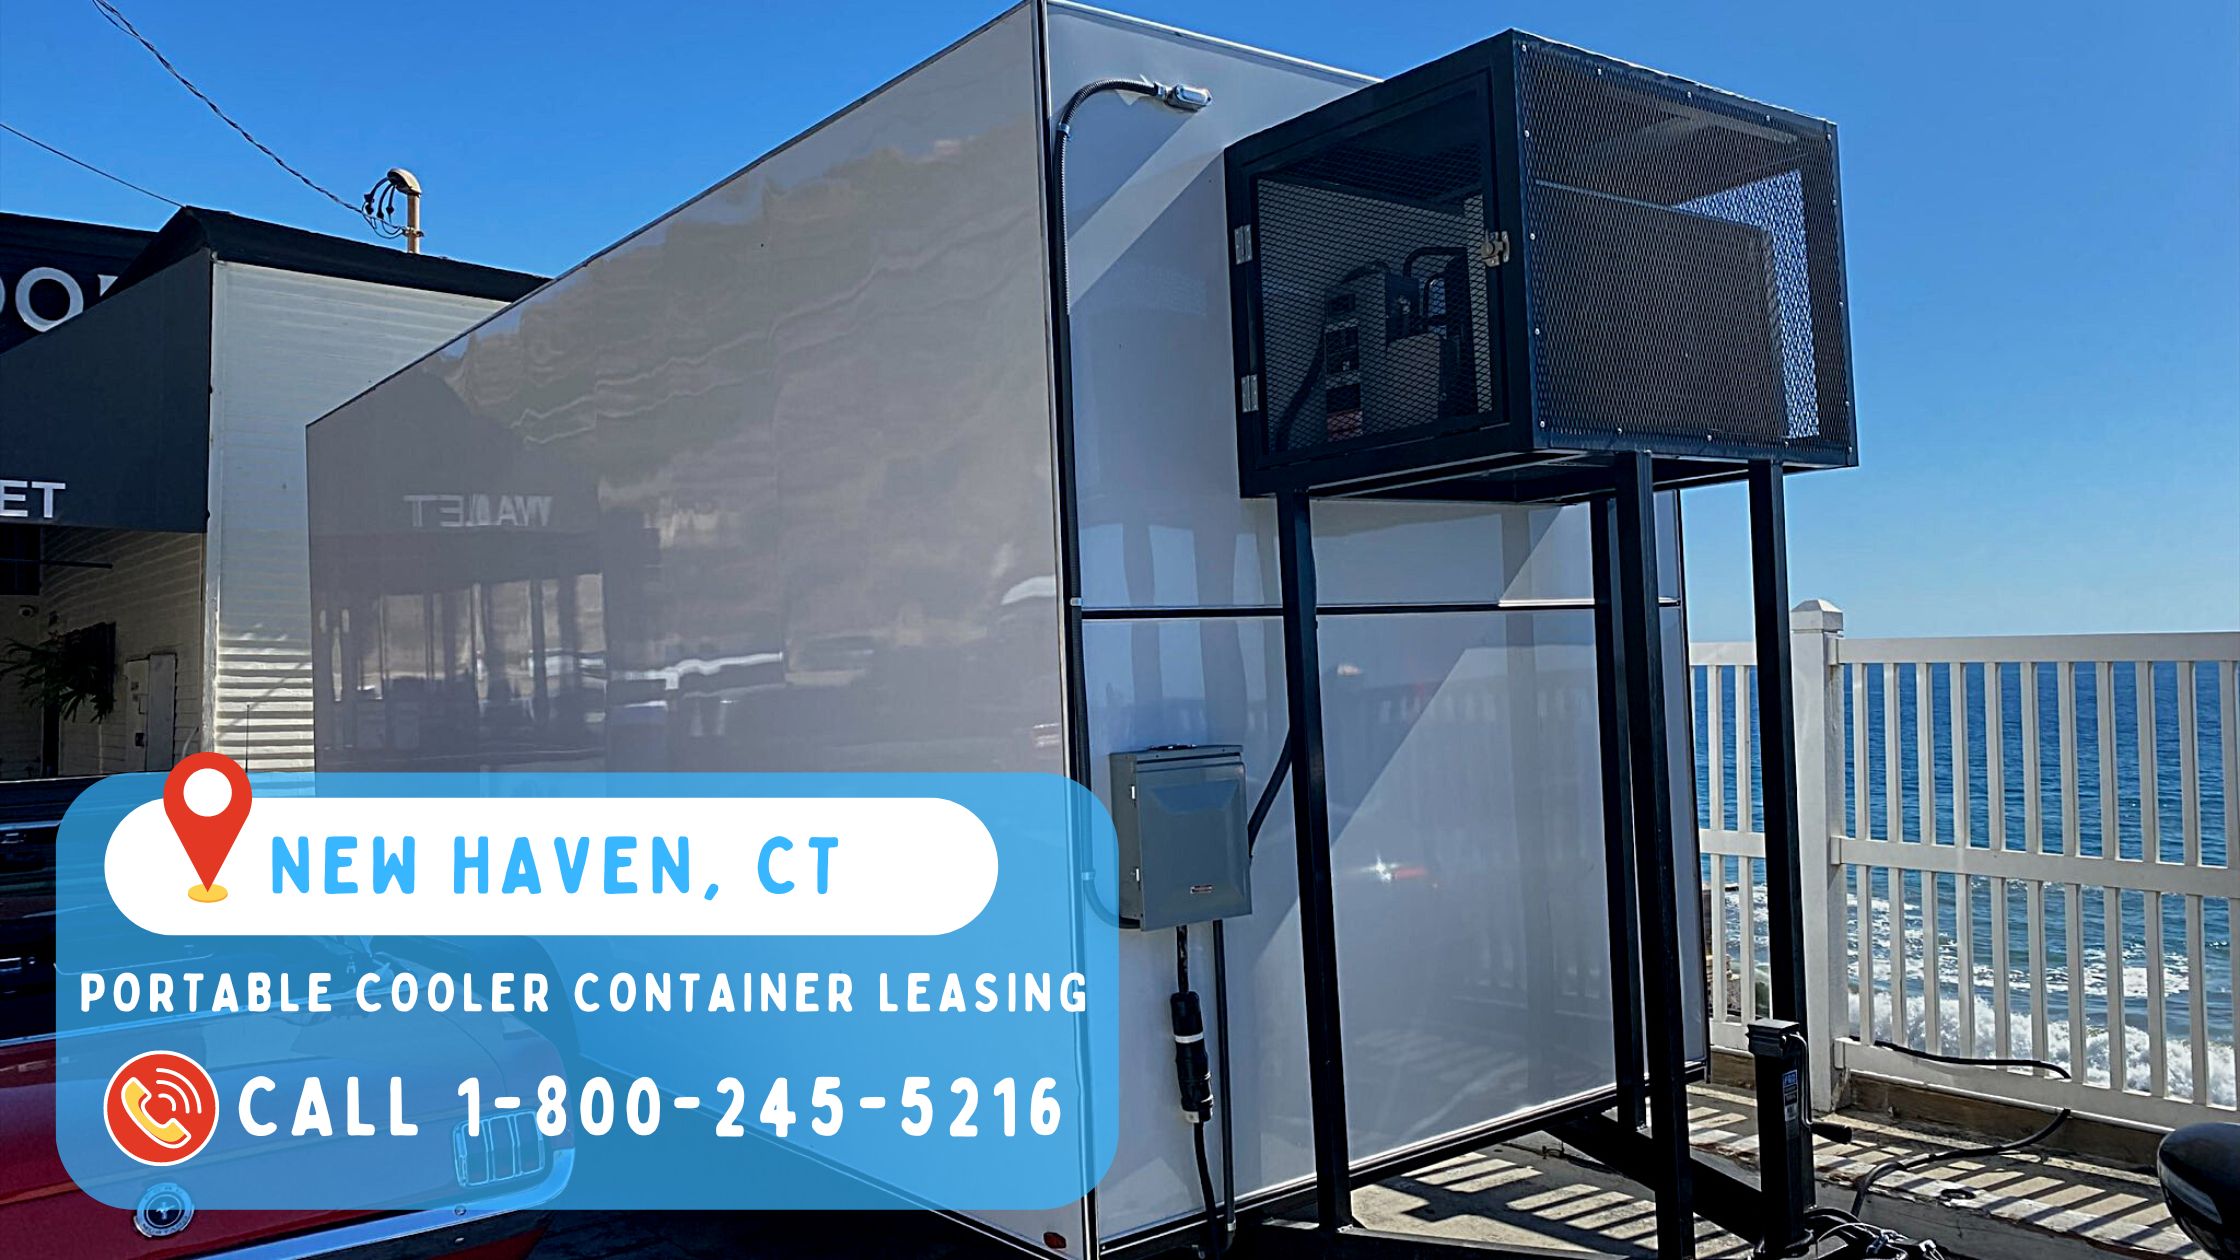 Portable Cooler Container Leasing in New Haven